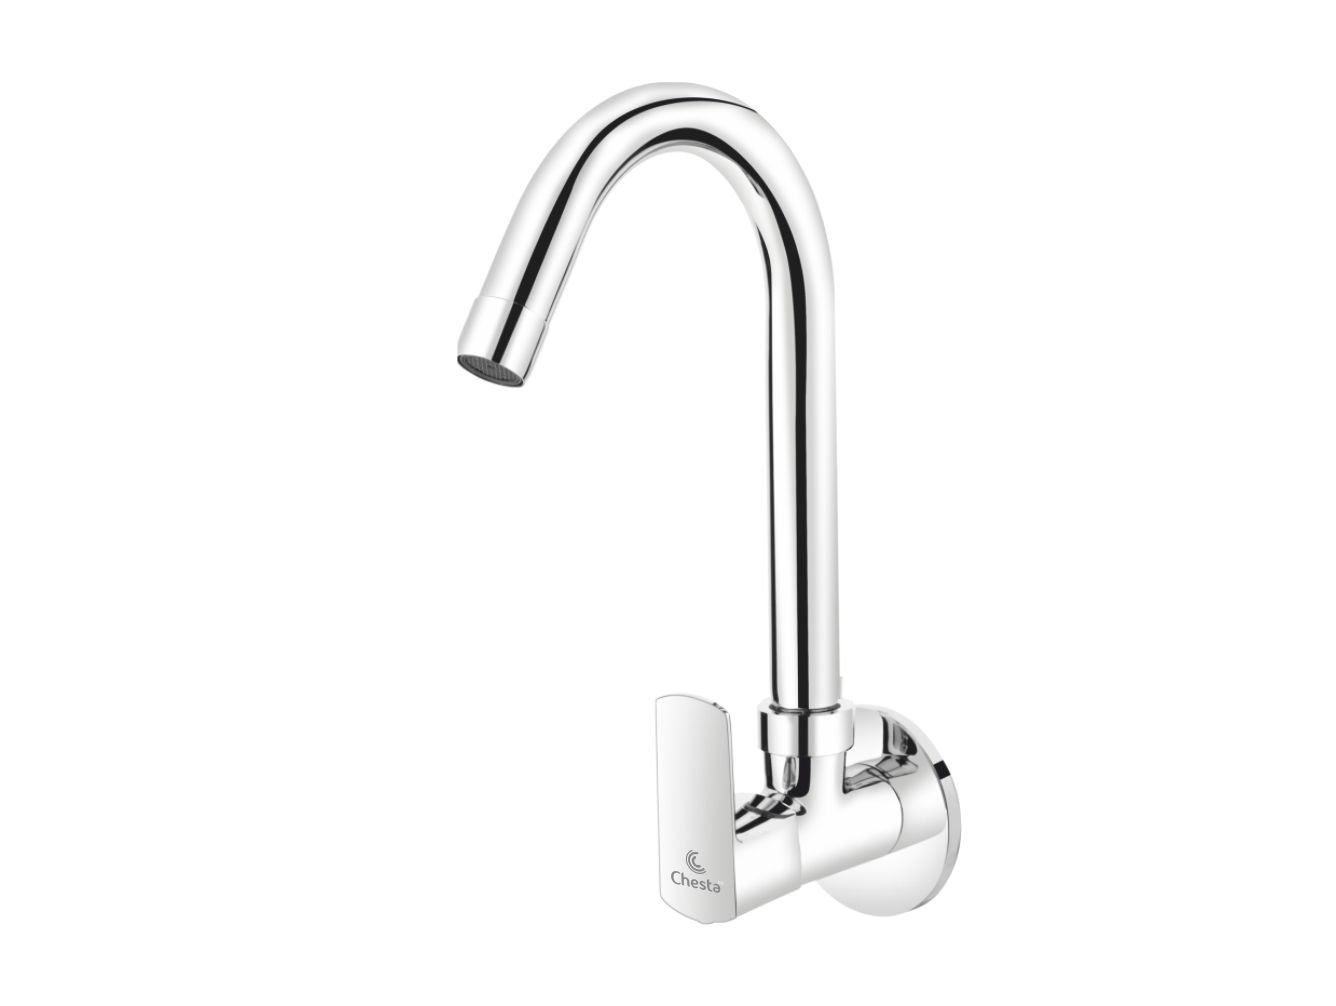 BL - 1007 - Sink Cock with Wall Flange at Chesta Bath Fittings